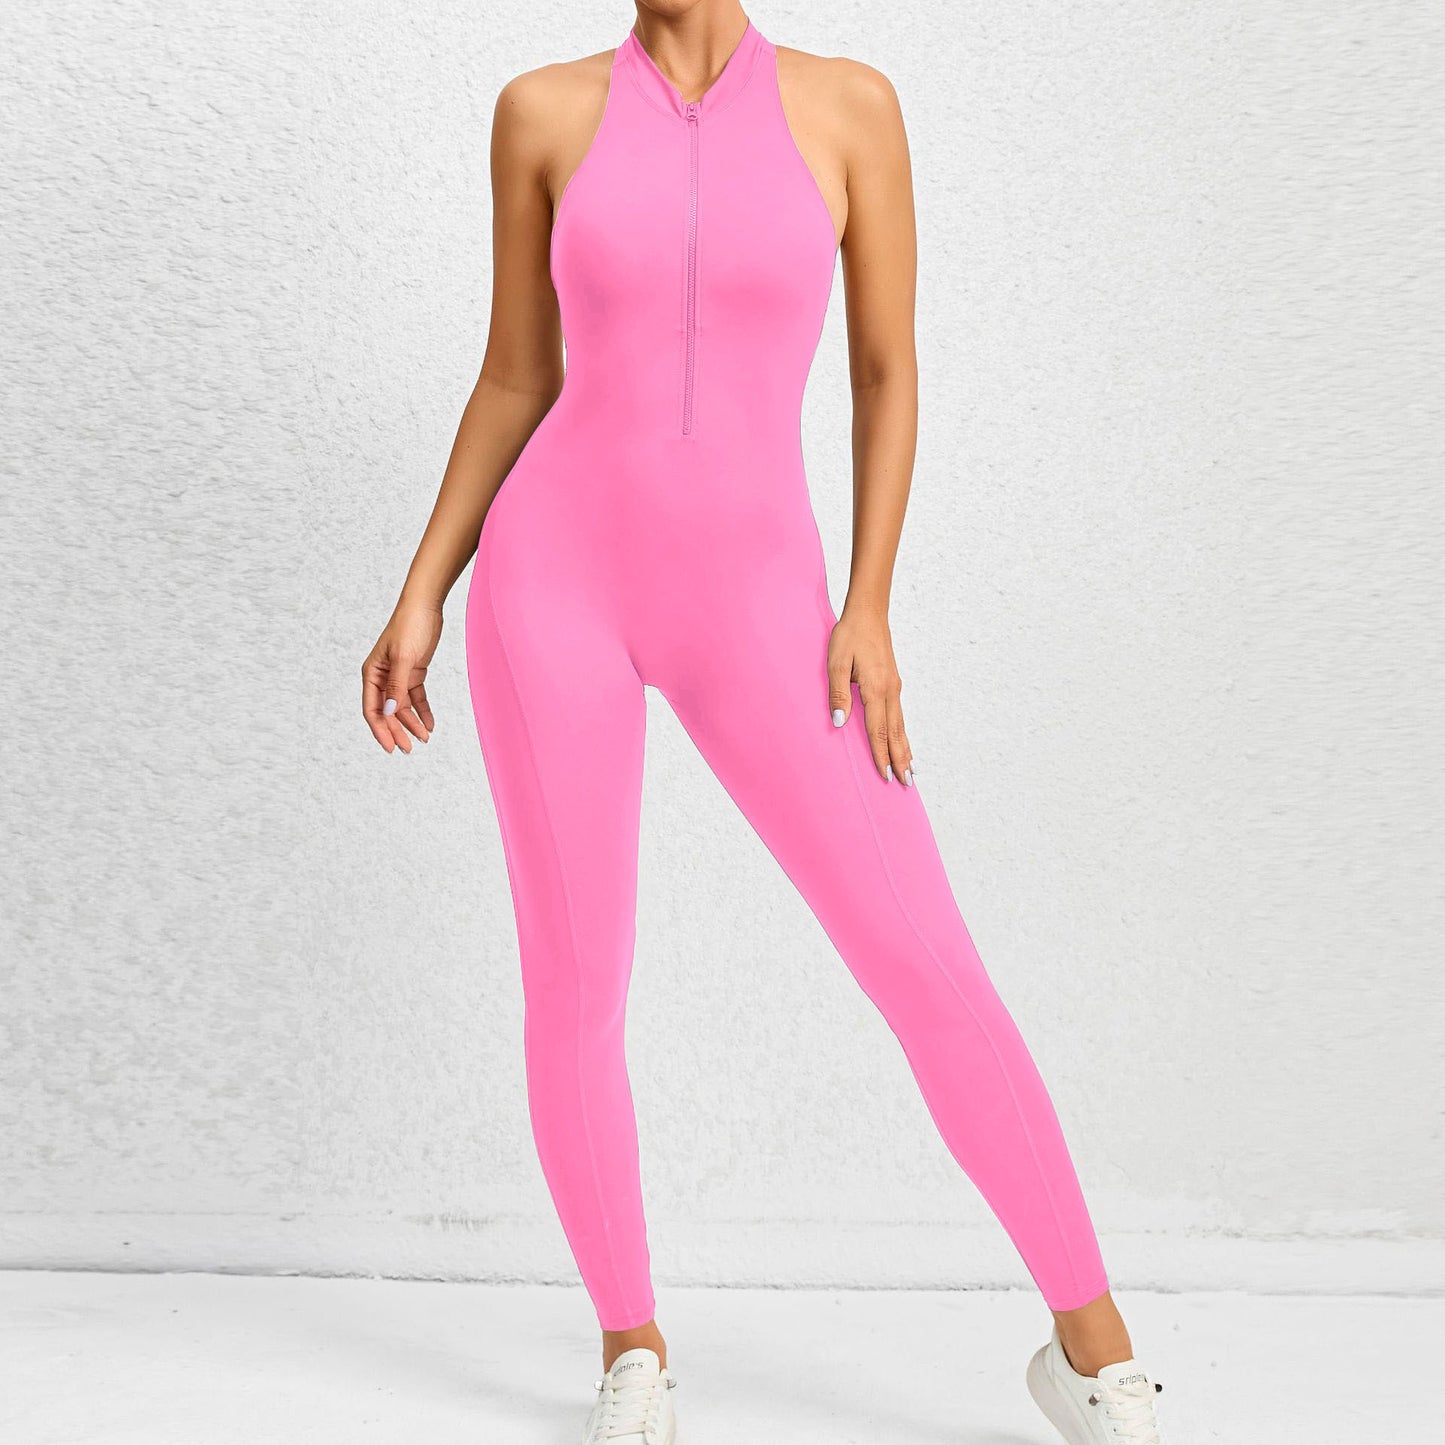 WILKYsJumperZippered Yoga Fitness Jumpsuit Sleeveless Tummy Control Stretch Shapew


This zippered yoga fitness jumpsuit is designed to enhance your curves and support your body during your workouts. It features a sleeveless design, a tummy contro